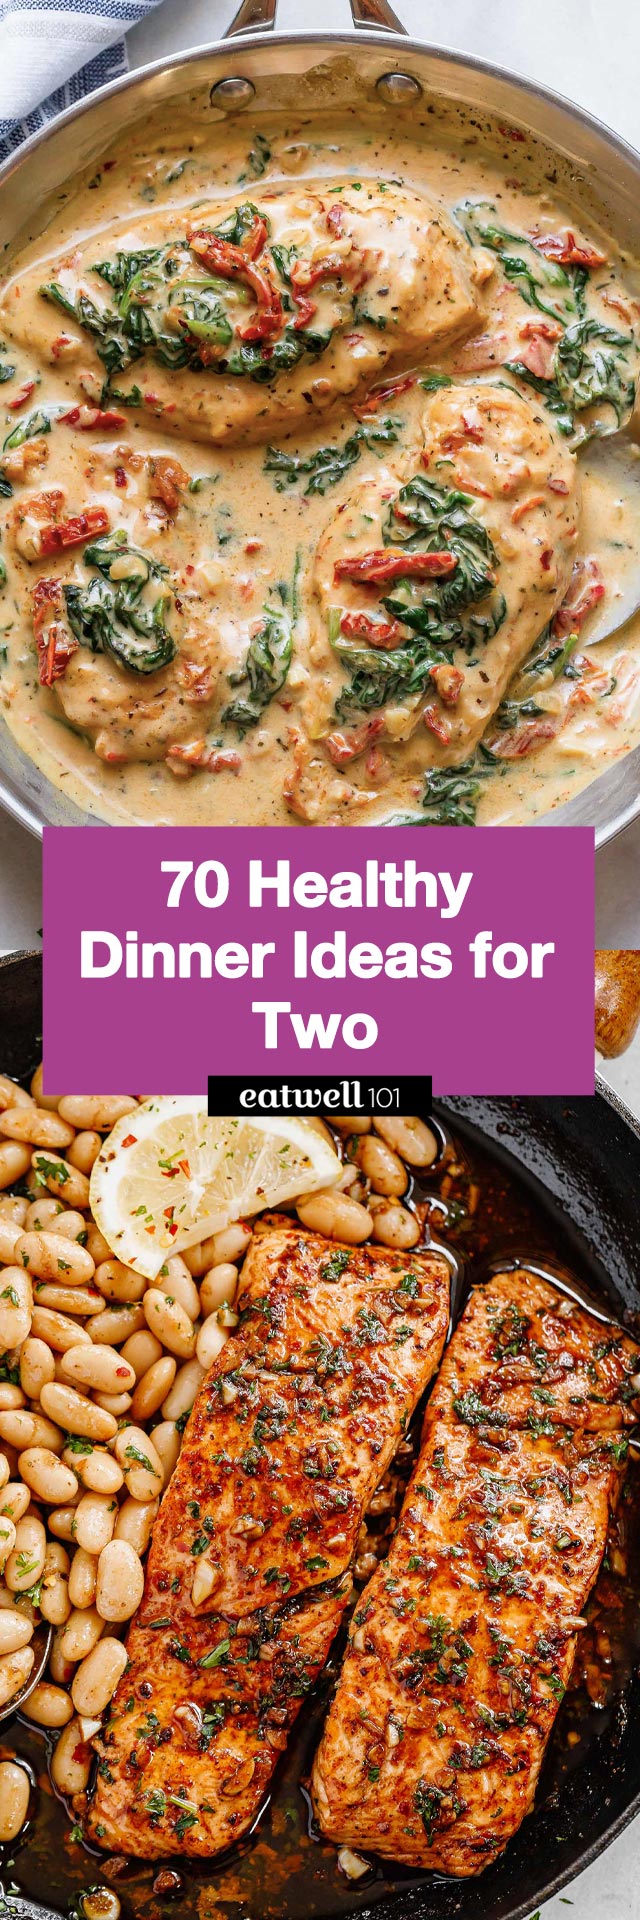 72 Easy Quick & Healthy Meals - Low-Cal, Fast, Healthy Recipes